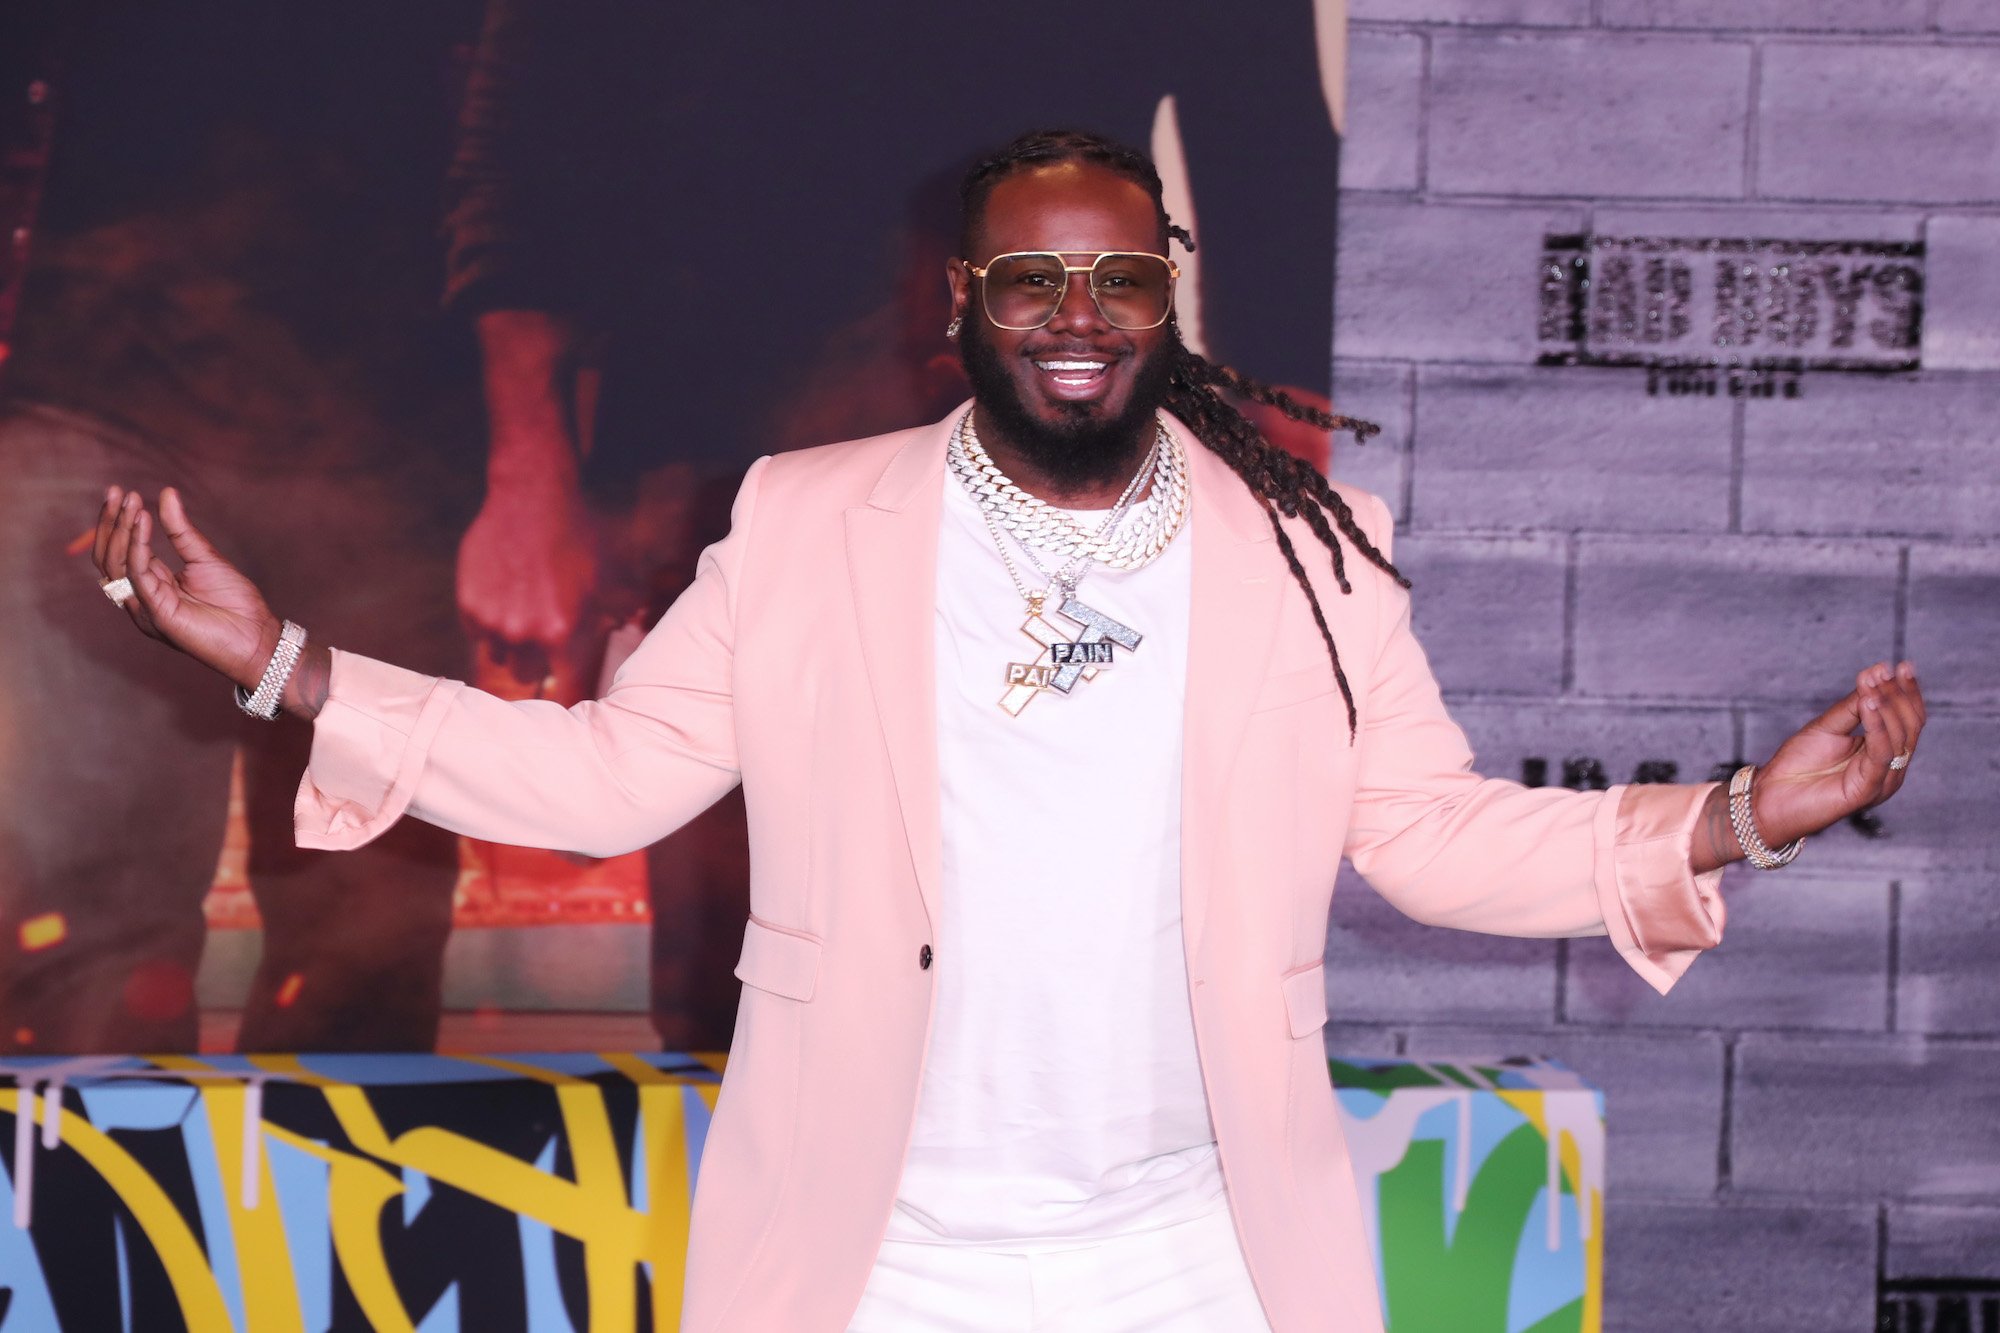 T-Pain shrugging with his arms outstretched